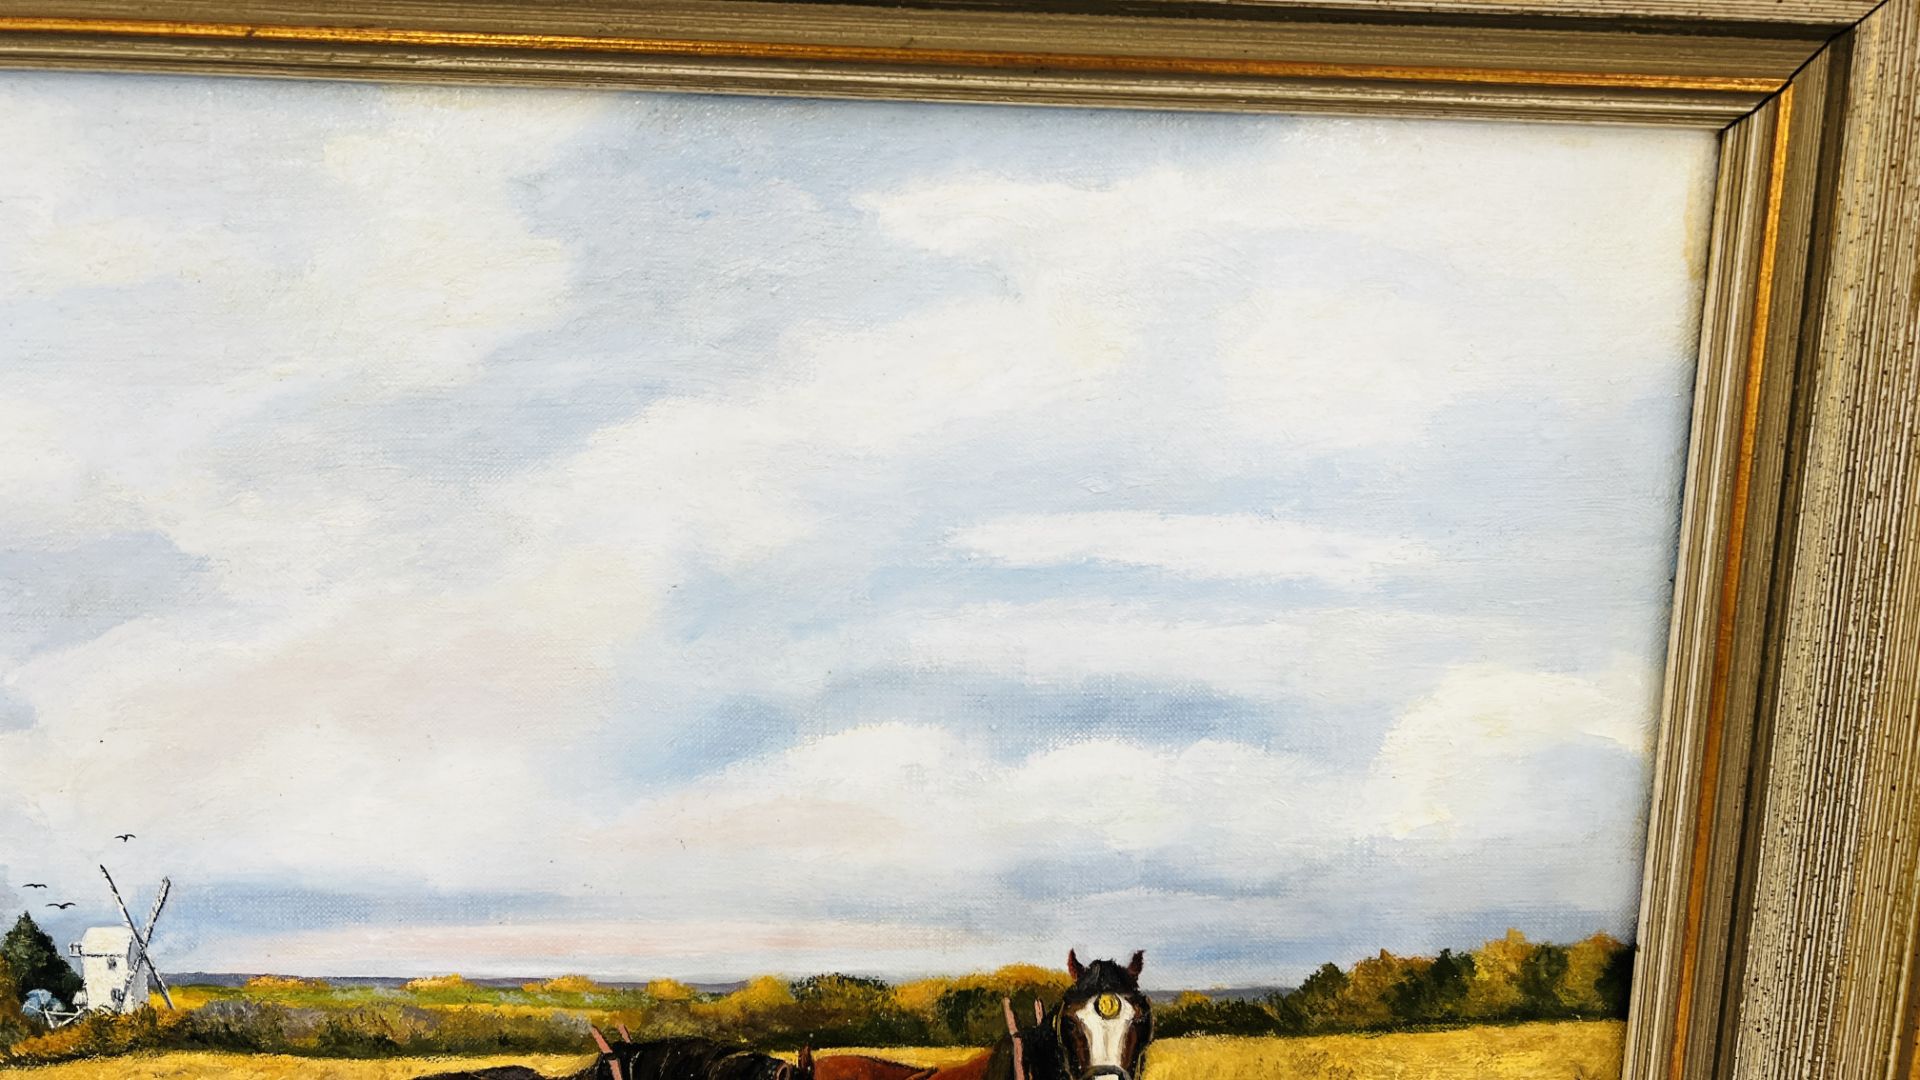 OIL ON CANVAS "AUTUMN PLOUGHING BECCLES ROAD HOTTON" BEARING SIGNATURE JOHN MUNNINGS - 60CM X 40CM. - Image 4 of 9